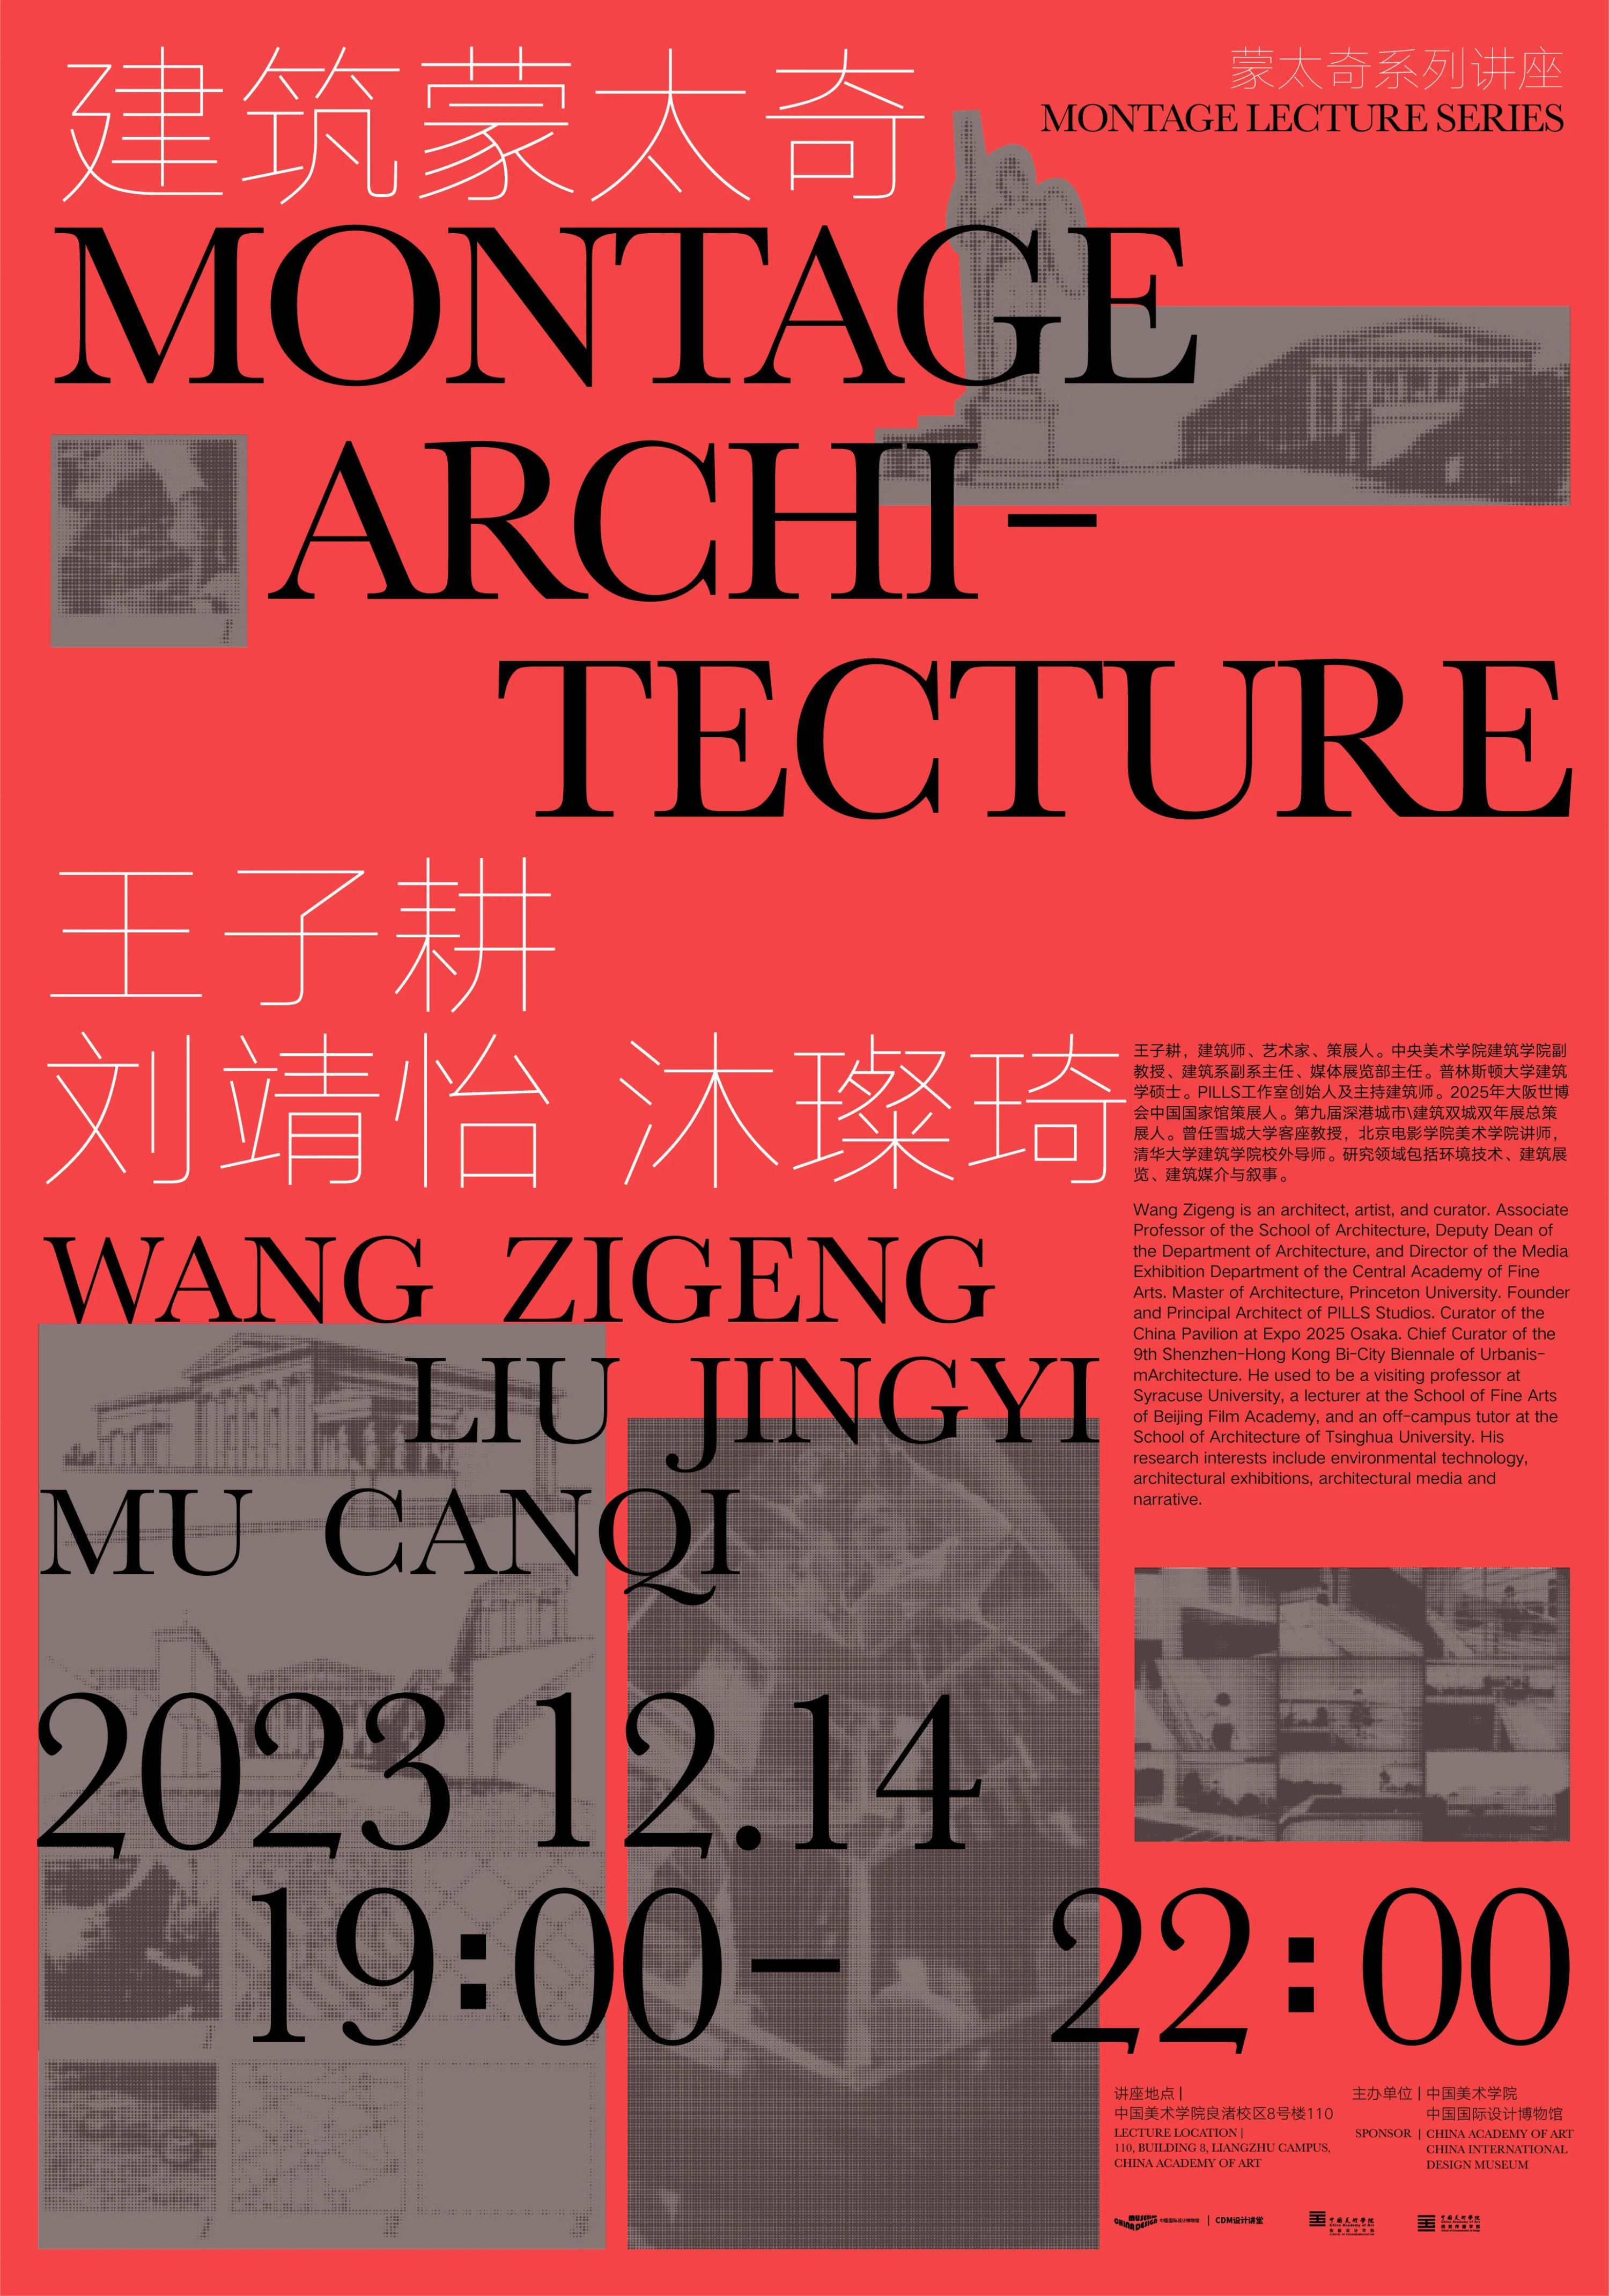 PILLS is invited by the China International Design Museum's Montage Series Lectures to Share the Course “Eisenstein and Architectural Montage” 